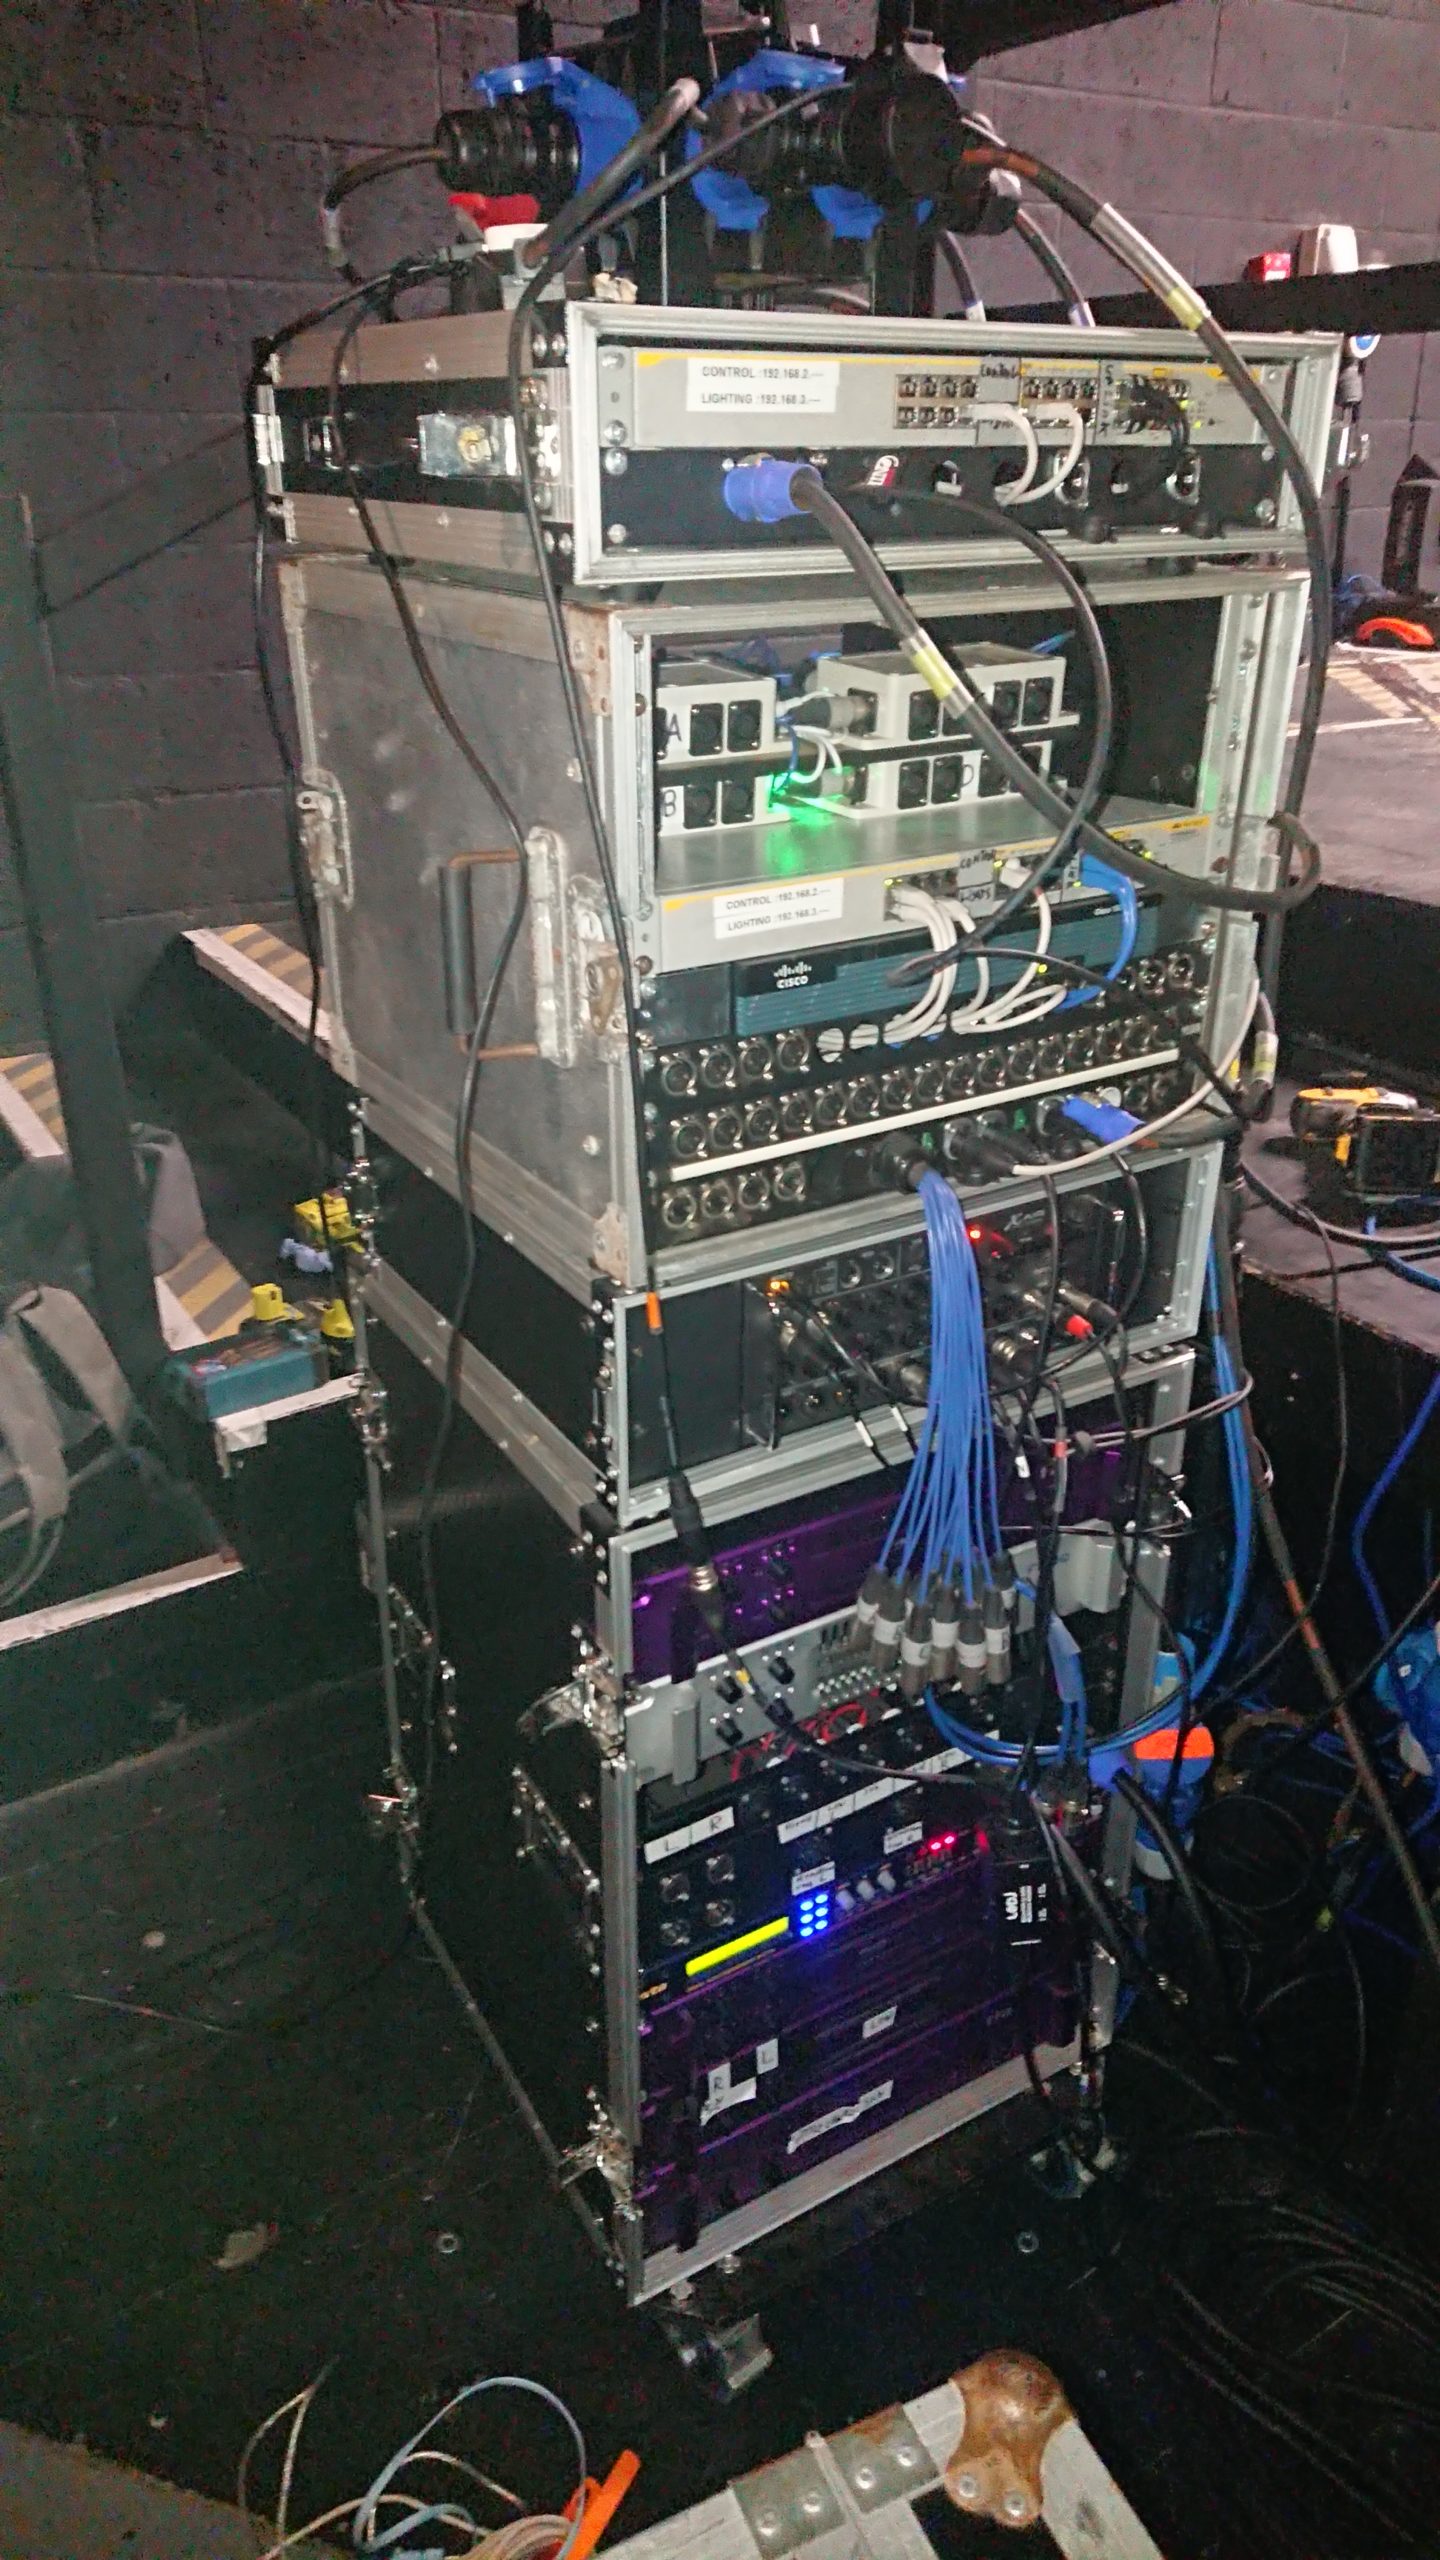 Main amp rack with back of stage data network cisco. front of house rack on top